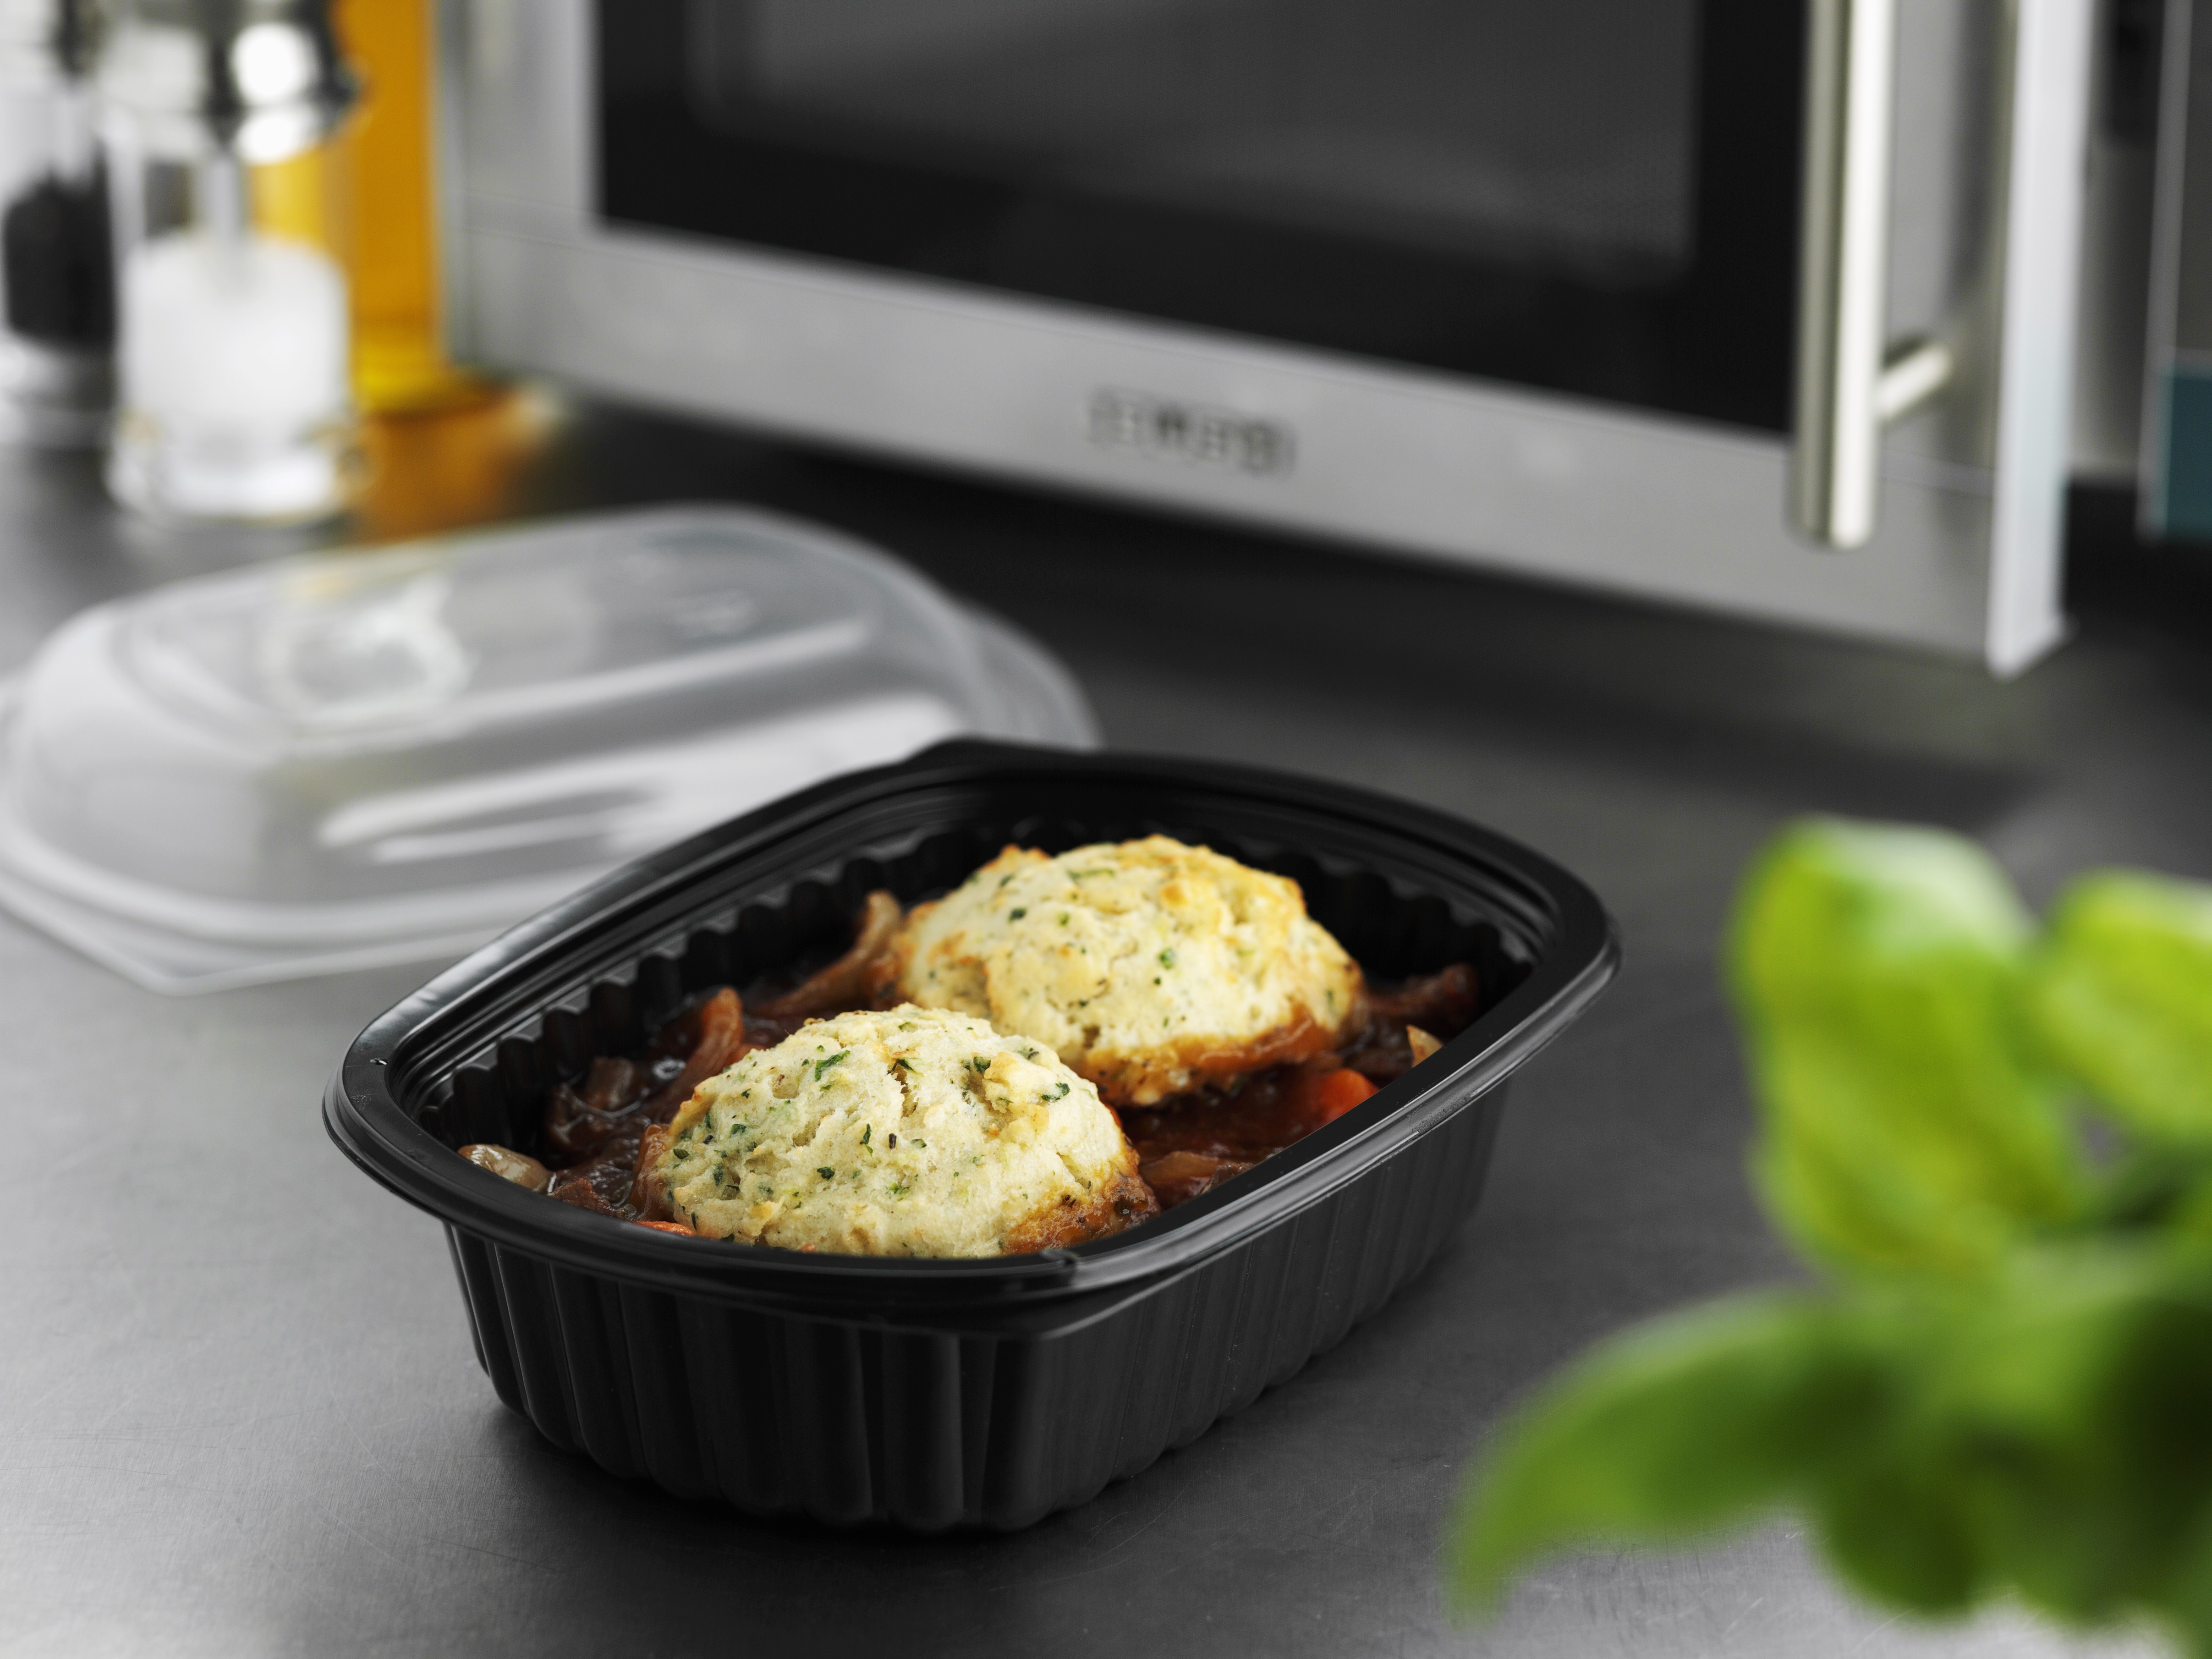 Beef stew in plastic container in front of microwave oven